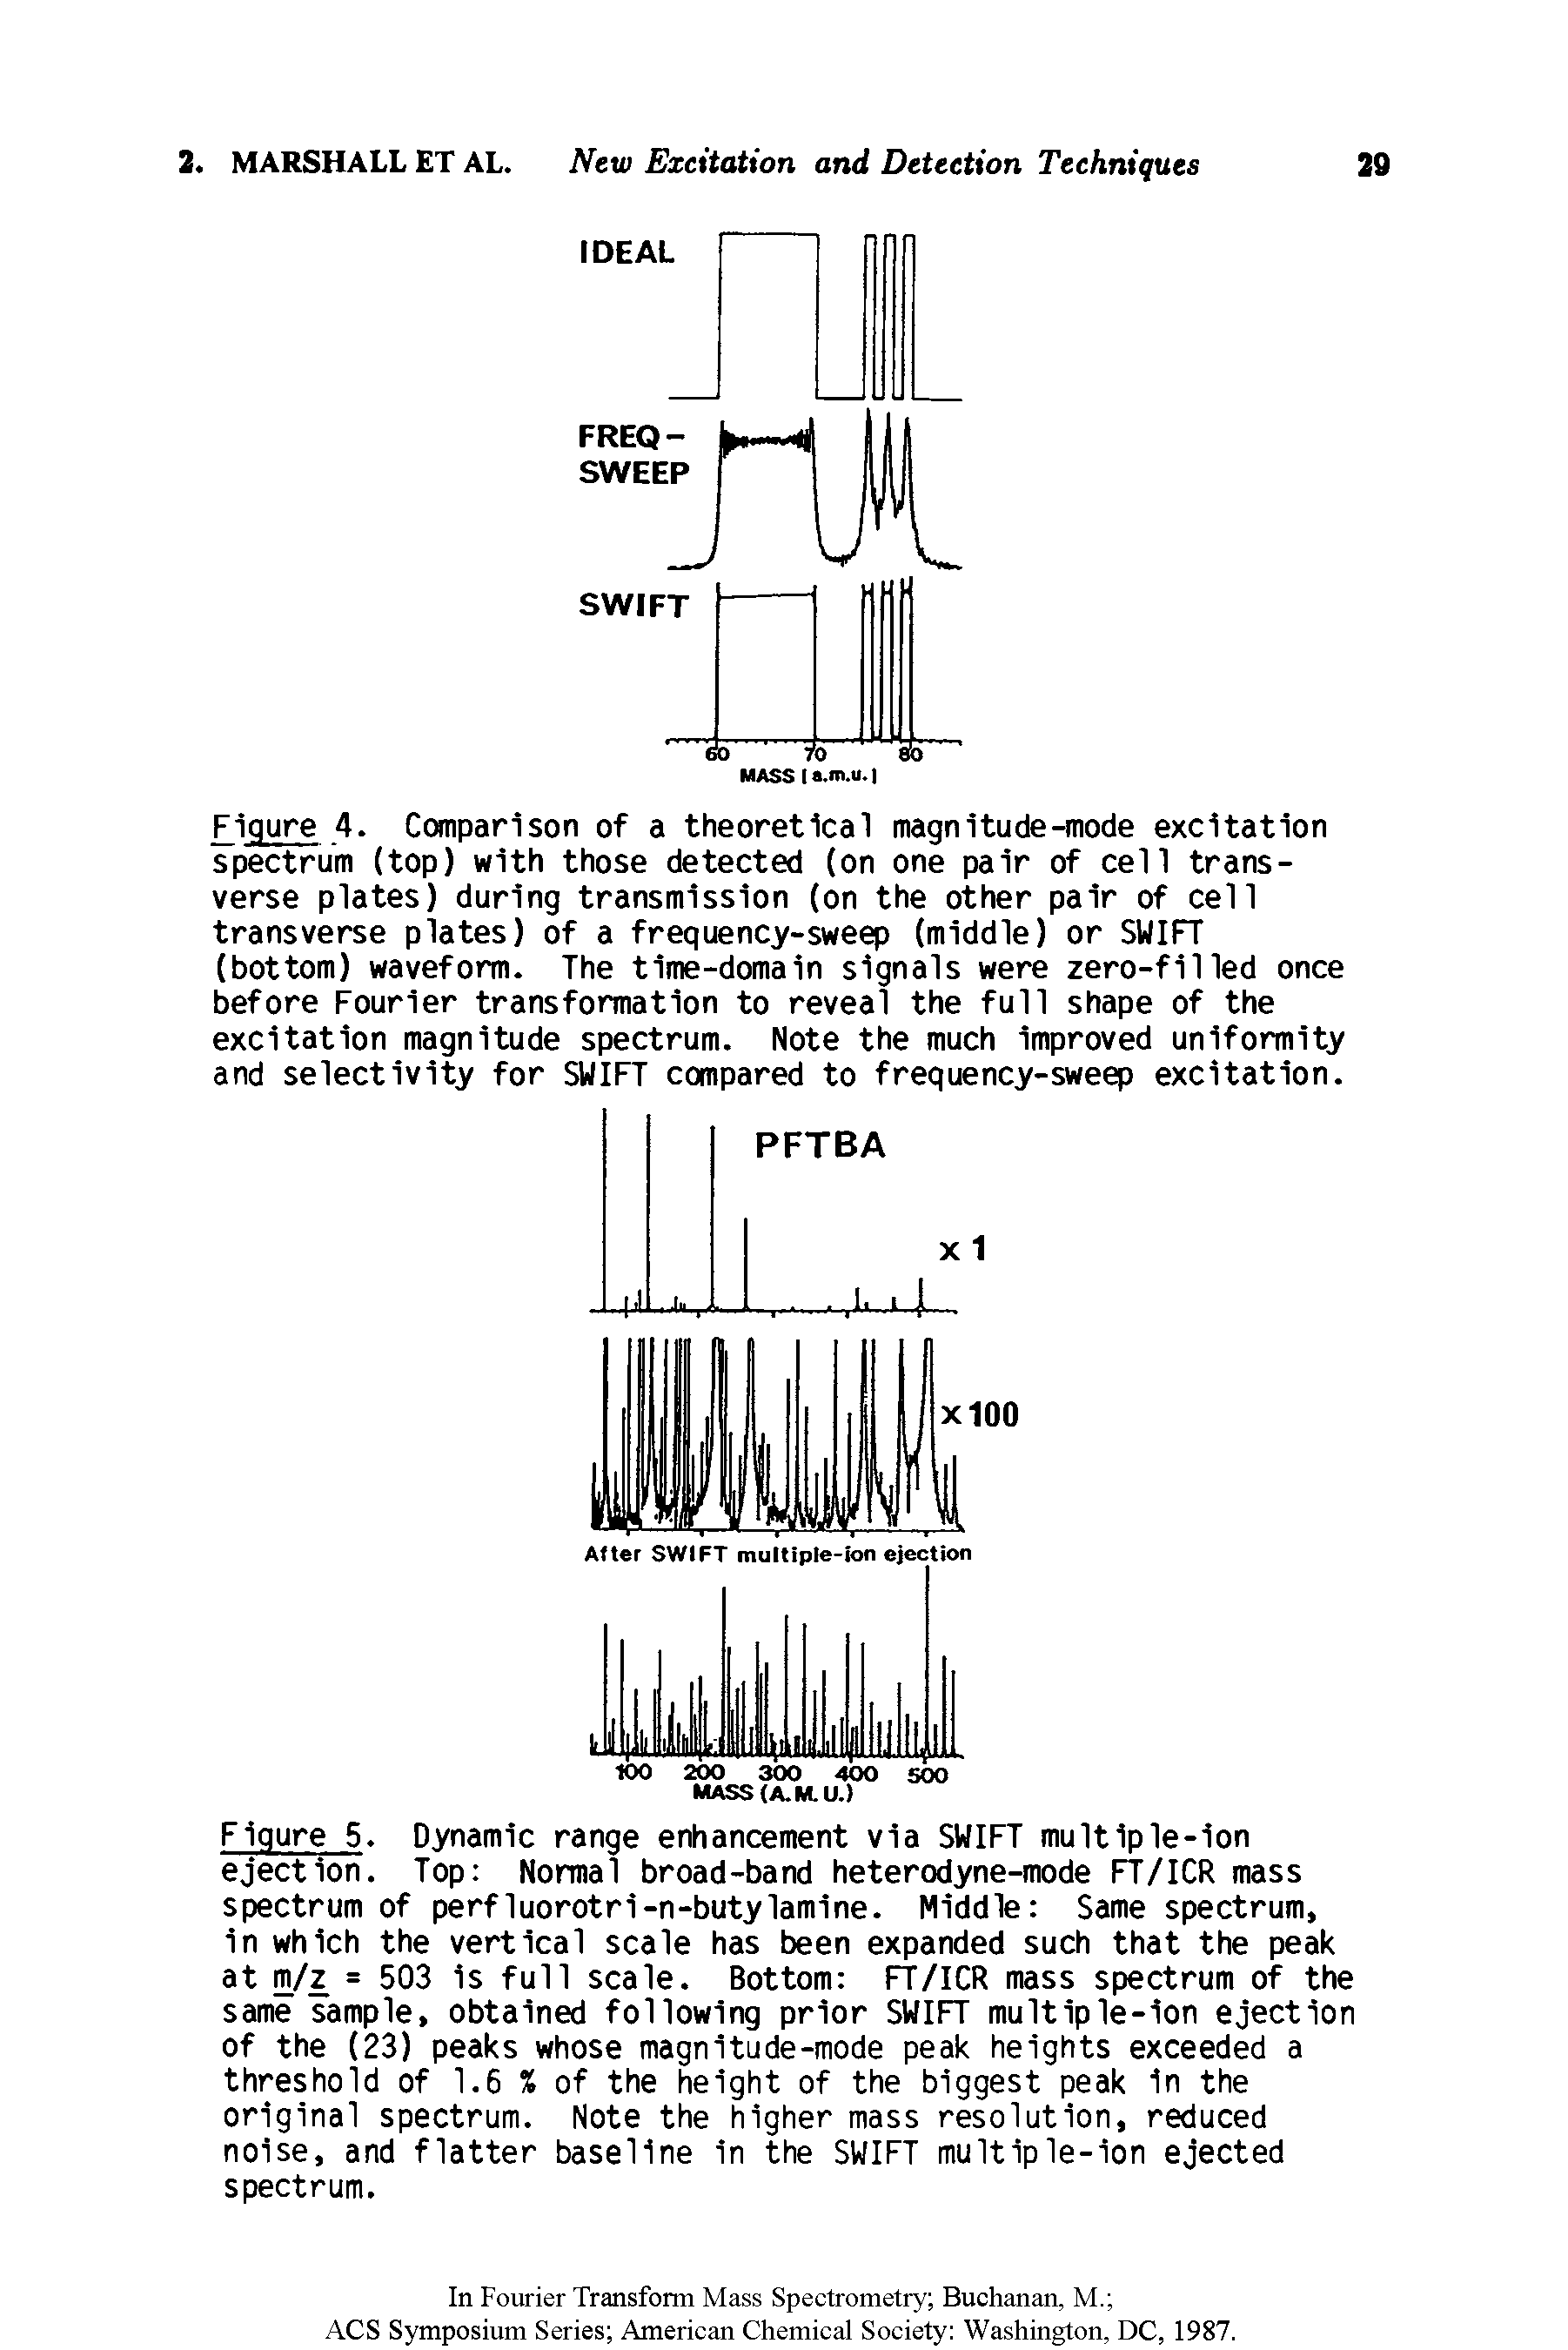 Figure 5. Dynamic range enhancement via SWIFT multiple-ion ejection. Top Normal broad-band heterodyne-mode FT/ICR mass spectrum of perfluorotri-n-butylamine. Middle Same spectrum, in which the vertical scale has been expanded such that the peak at m/z = 503 is full scale. Bottom FT/ICR mass spectrum of the same sample, obtained following prior SWIFT multiple-ion ejection of the (23) peaks whose magnitude-mode peak heights exceeded a threshold of 1.6 % of the height of the biggest peak 1n the original spectrum. Note the higher mass resolution, reduced noise, and flatter baseline in the SWIFT multiple-ion ejected spectrum.